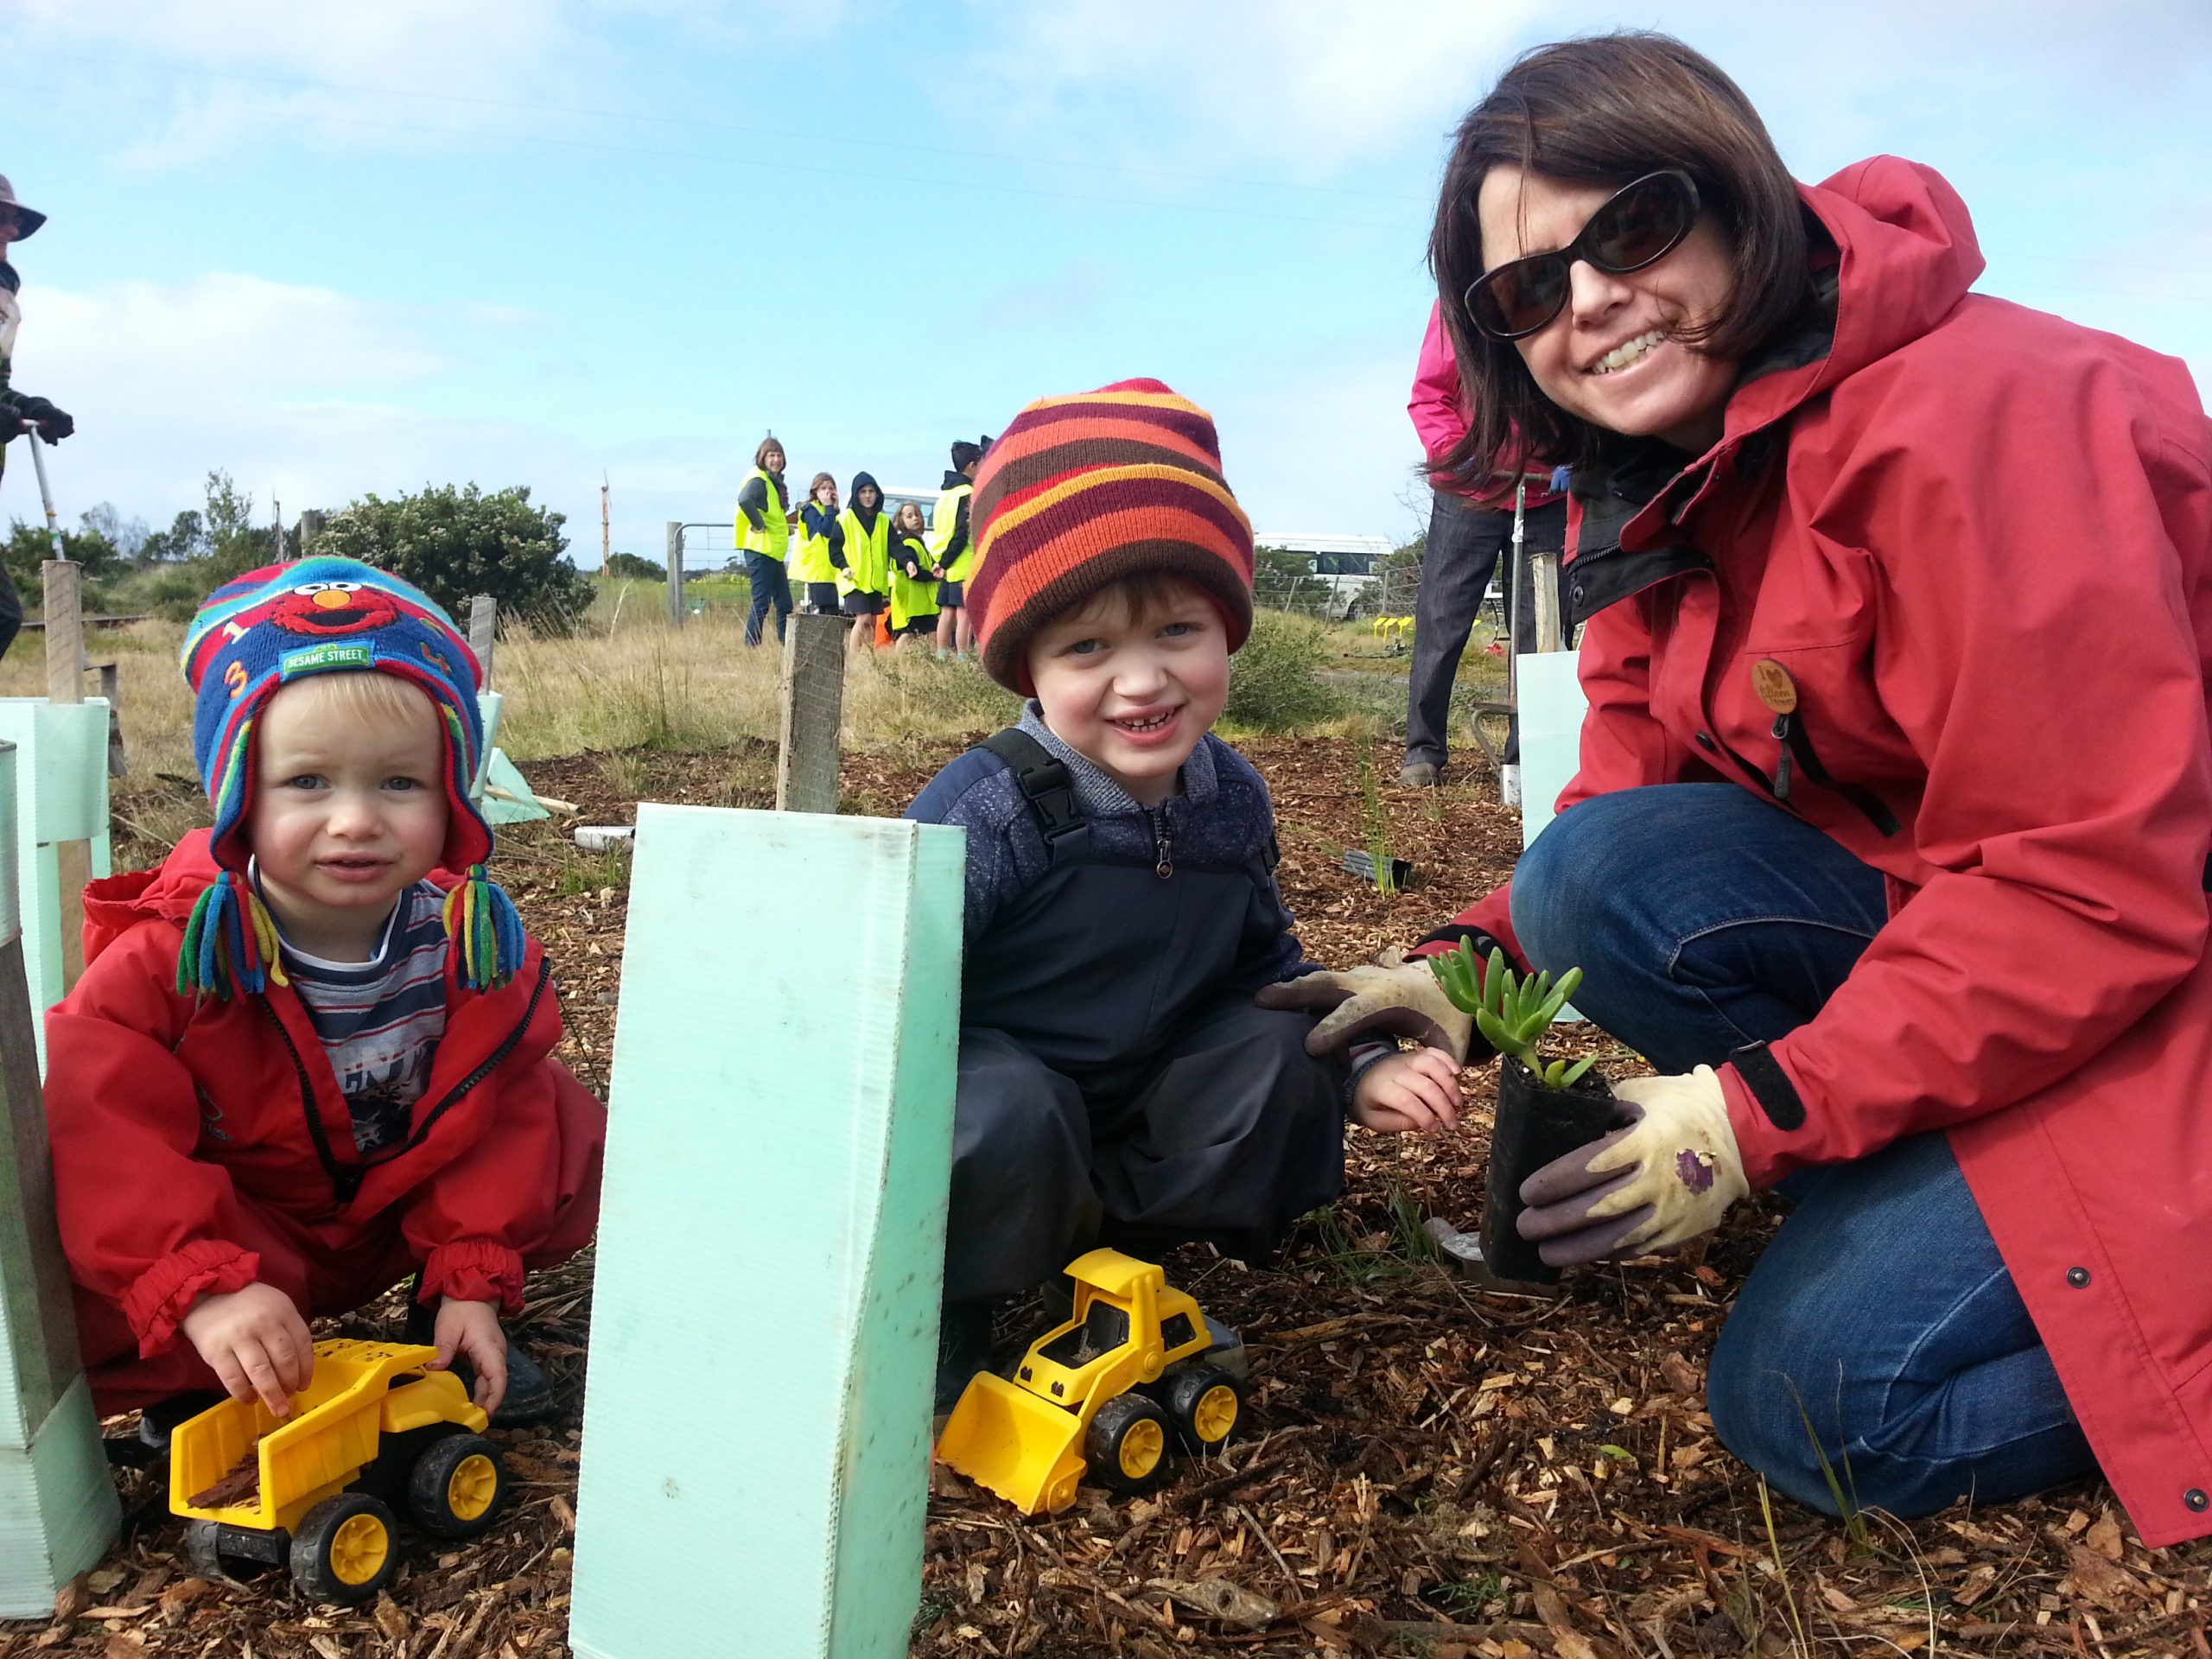 Tree planting for a carbon neutral event